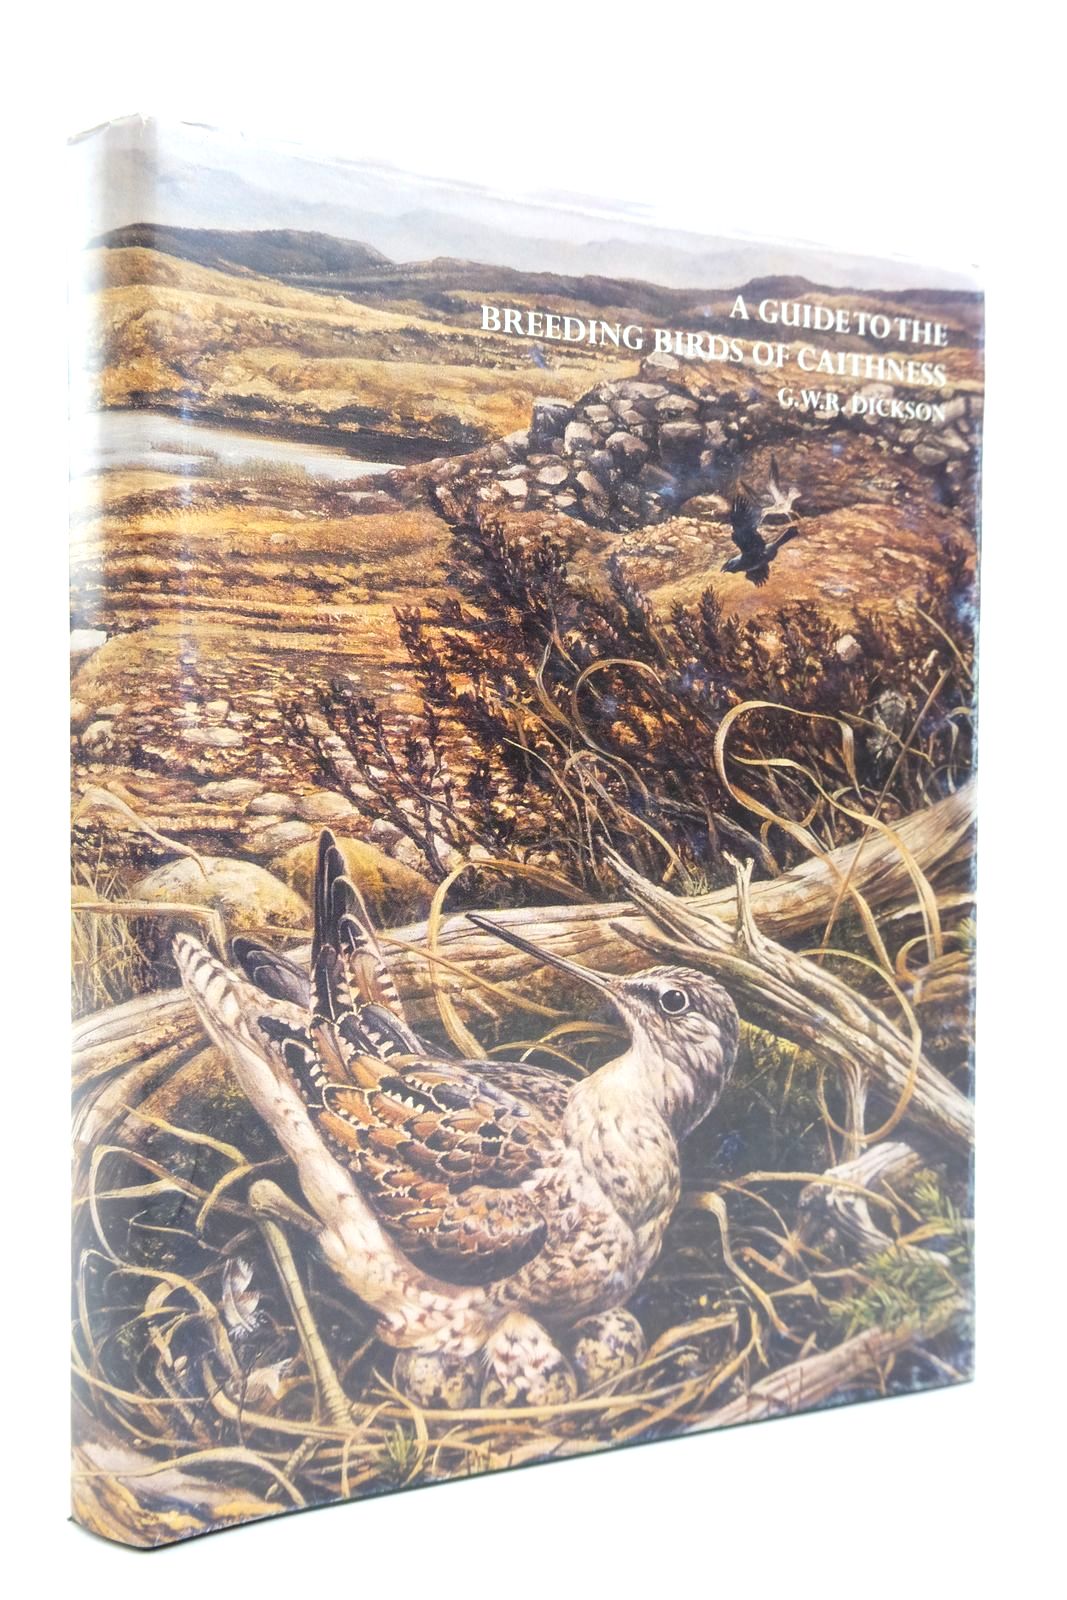 Photo of A GUIDE TO THE BREEDING BIRDS OF CAITHNESS- Stock Number: 2140709